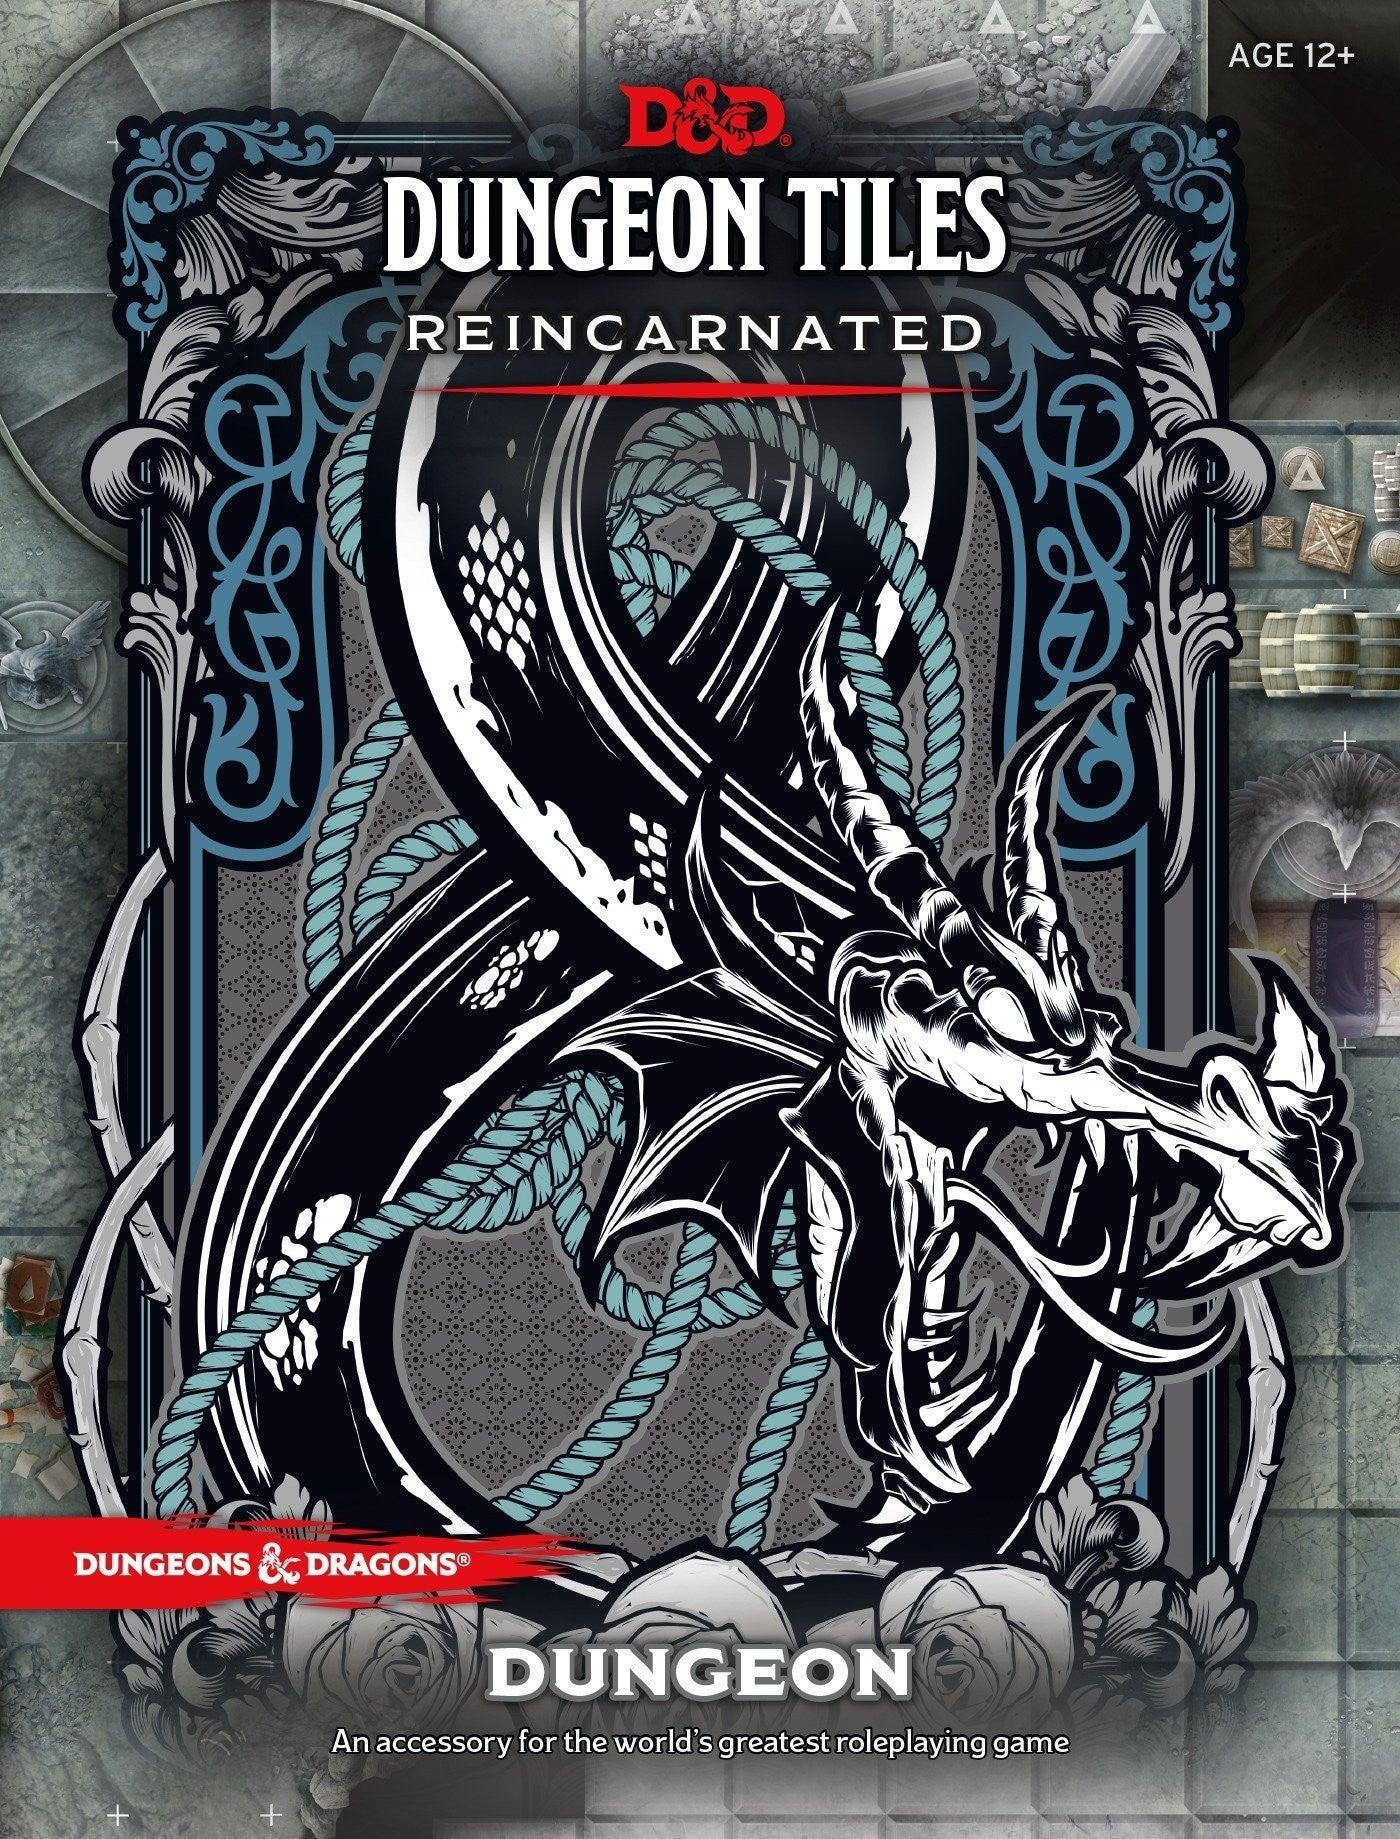 VR-87500 D&D Dungeons & Dragons Dungeon Tiles Reincarnated Dungeon - Wizards of the Coast - Titan Pop Culture